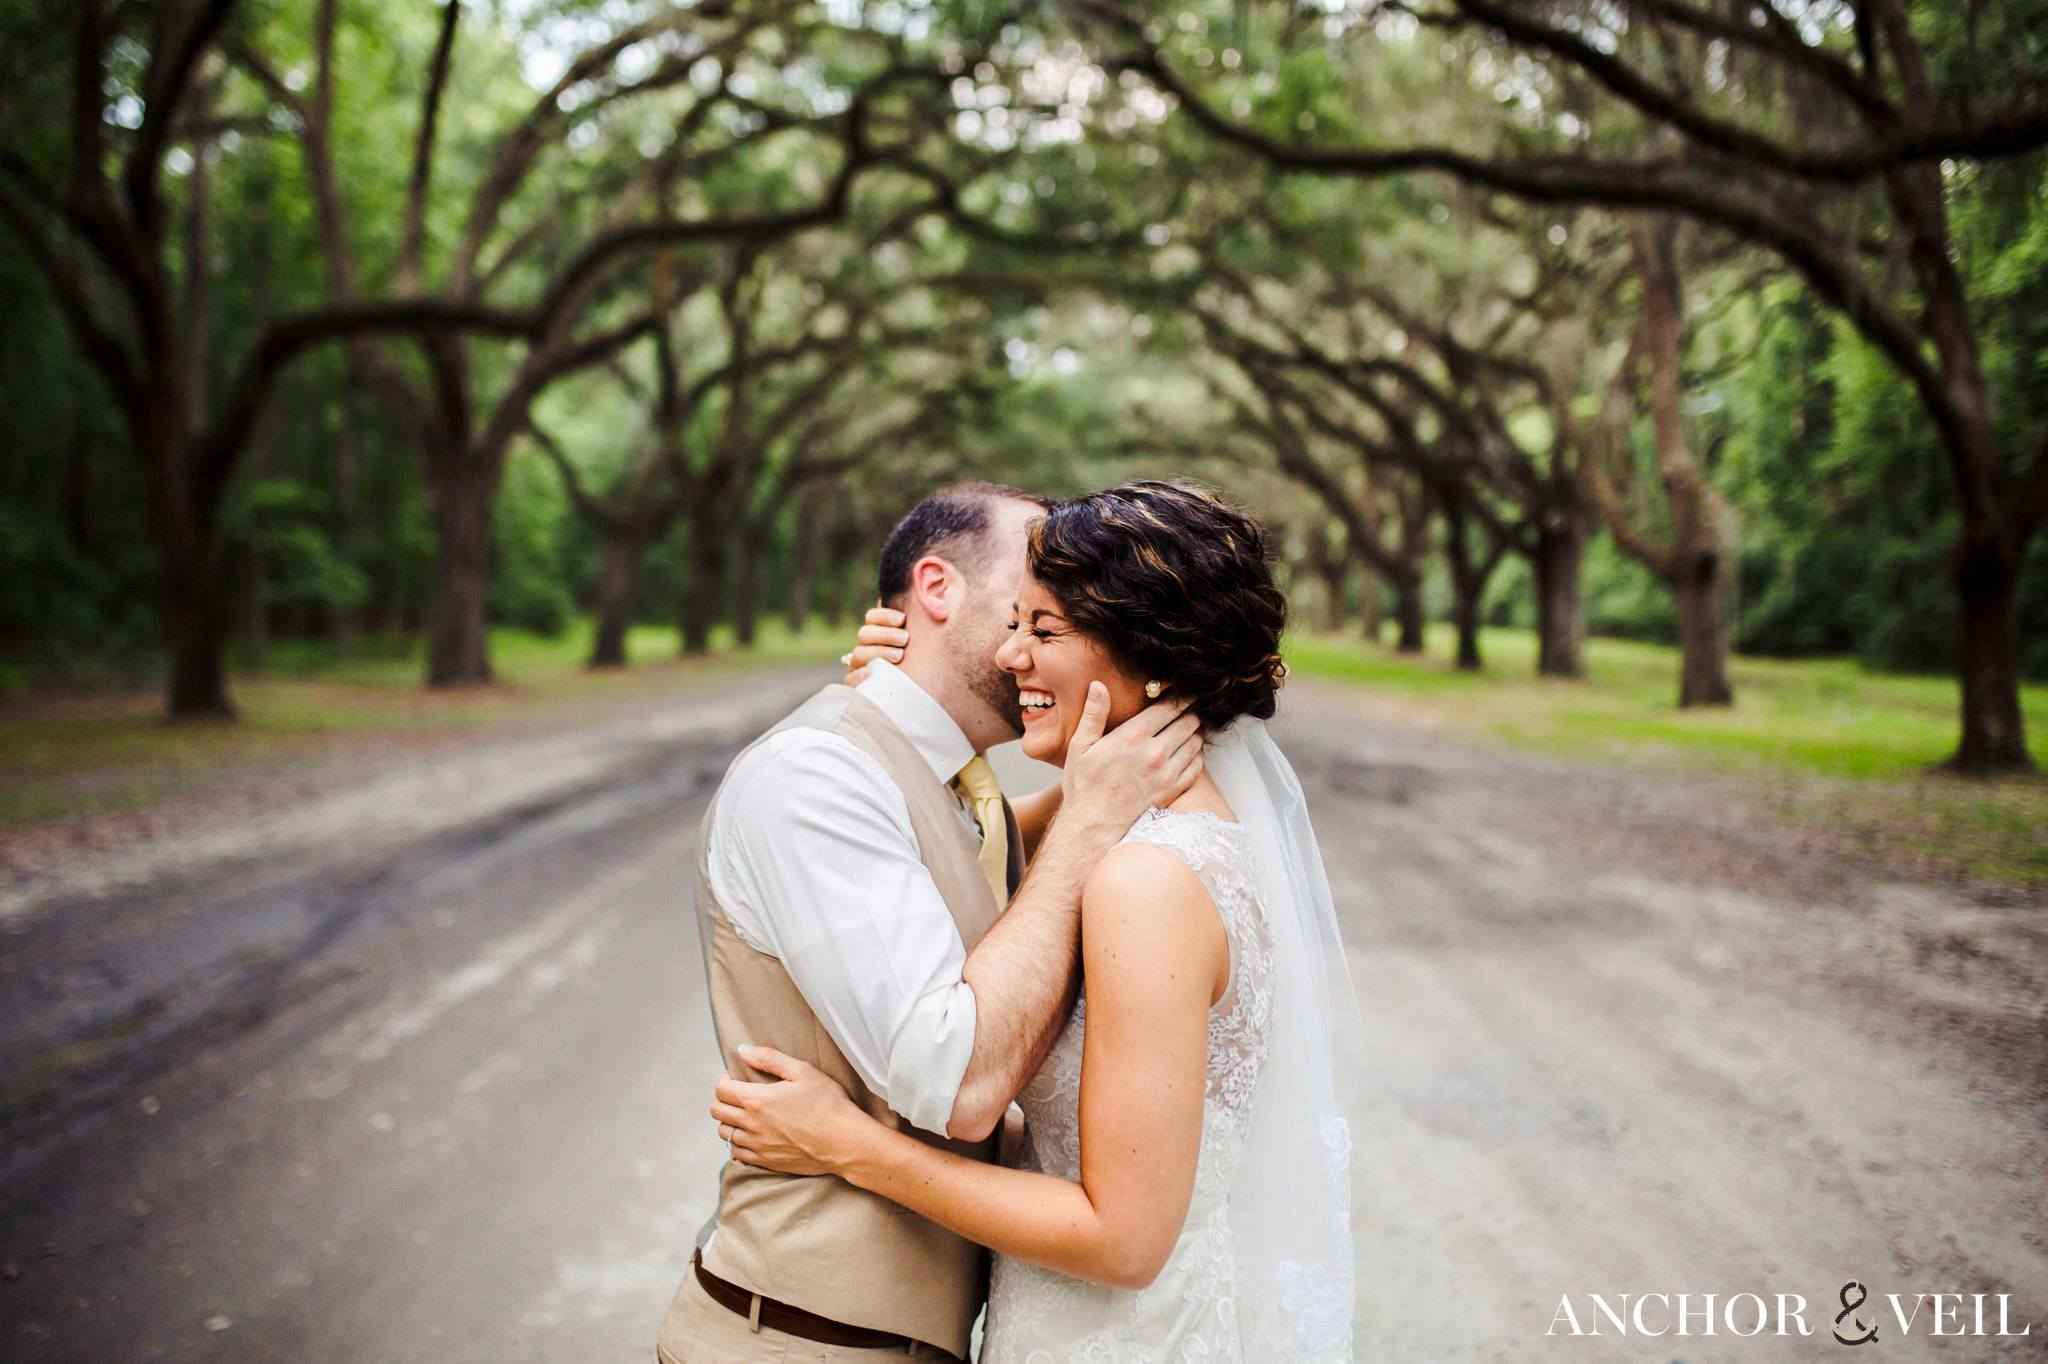 holding tight and whispering in her ear during their Forsyth Park Wedding Elopement